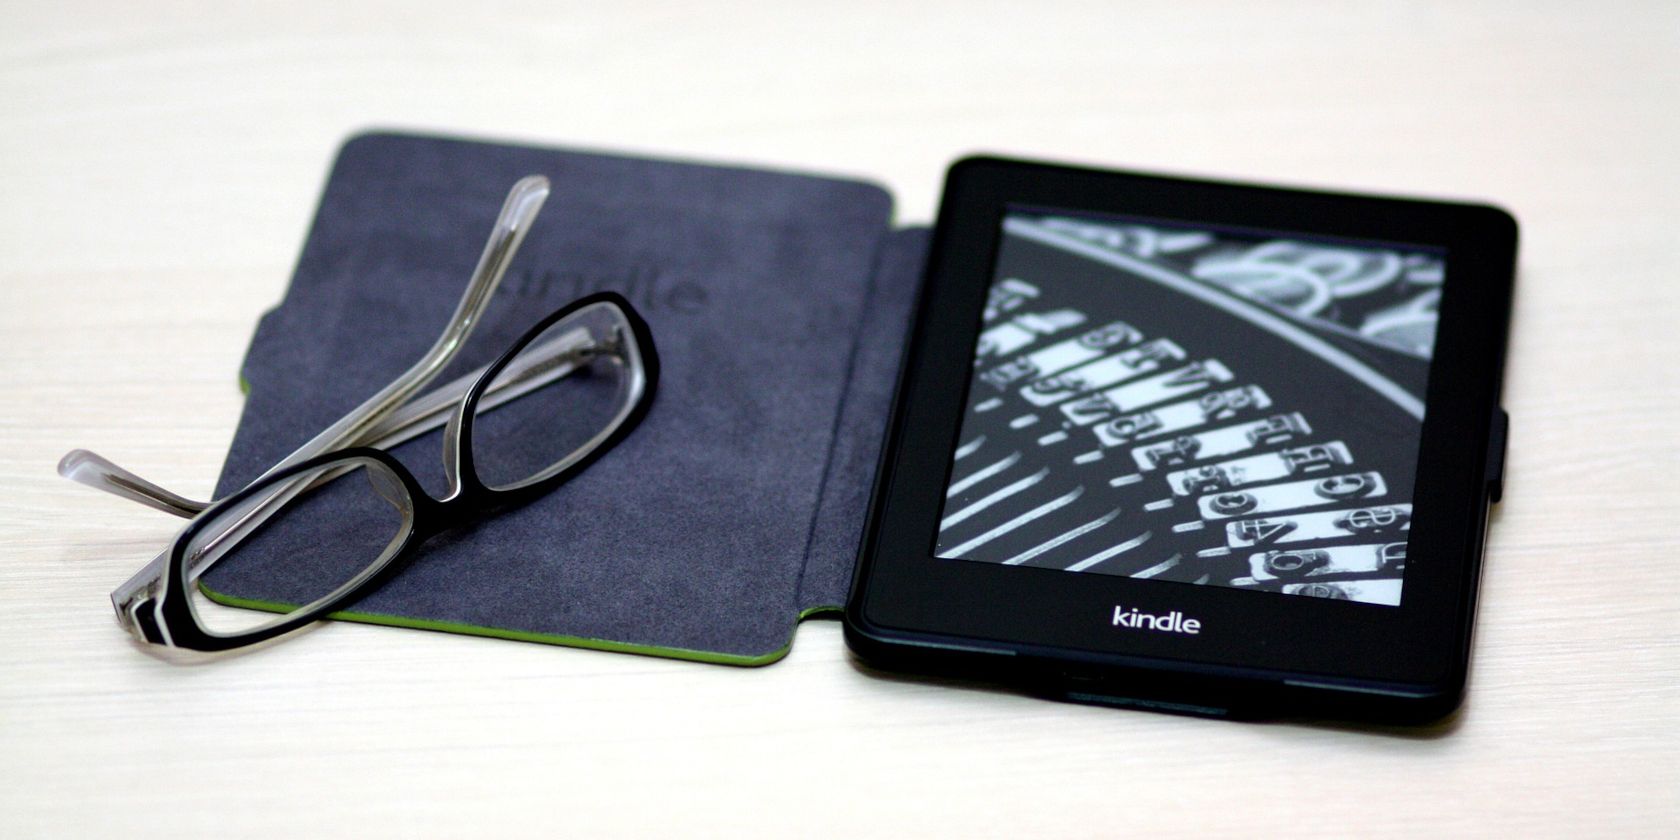 Amazon Kindle Device and Reading Glasses